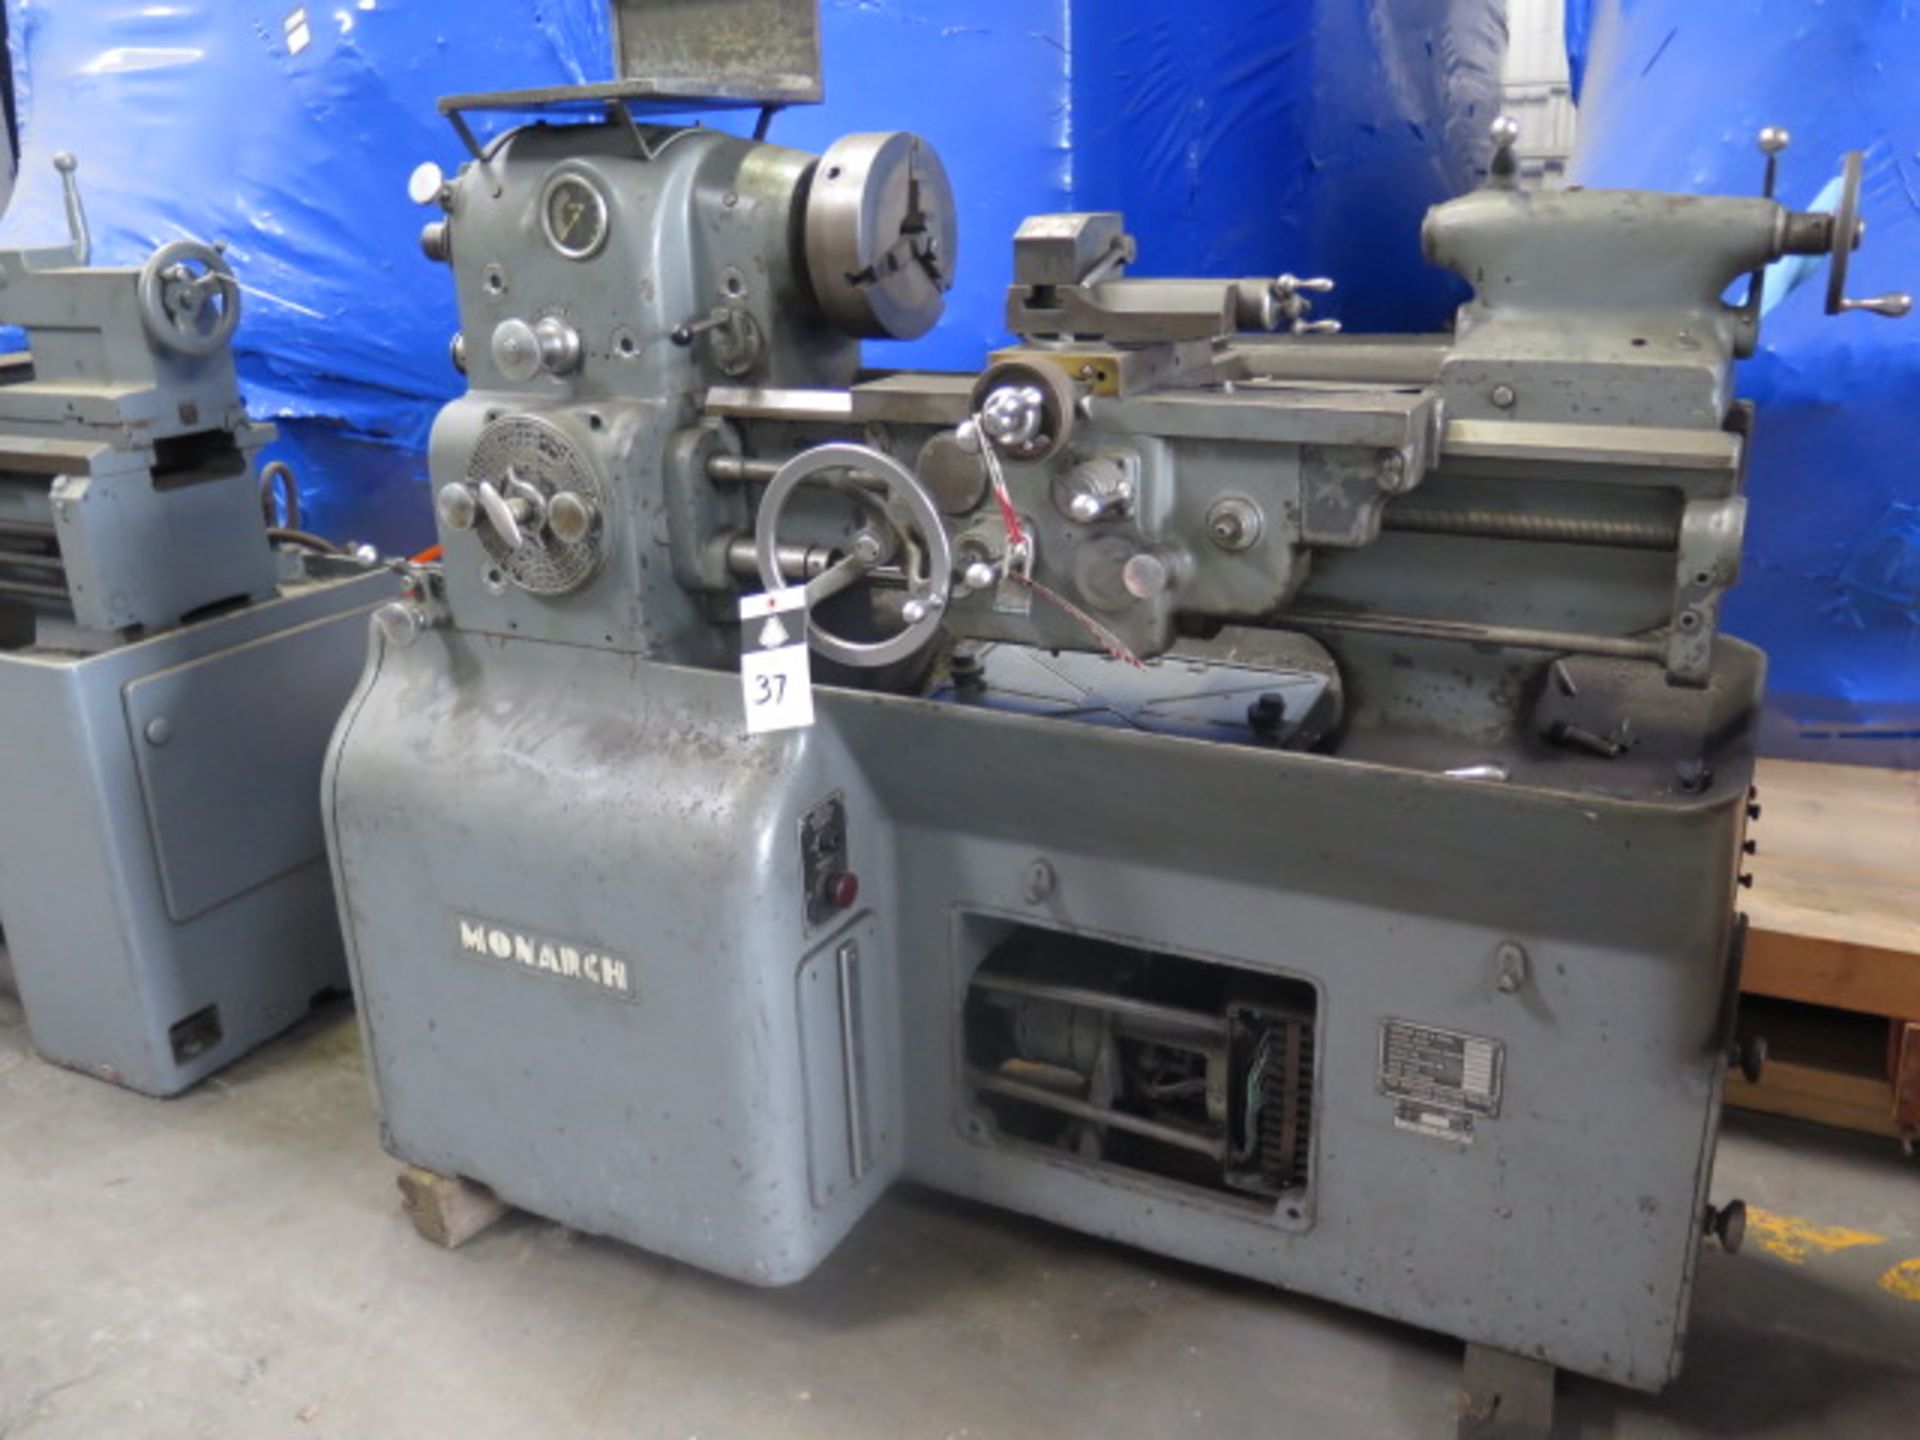 Monarch 10EE Tool Room Lathe s/n 11142 w/ 2500 RPM, Inch Threading, KDK Tool Post, SOLD AS IS - Image 2 of 12